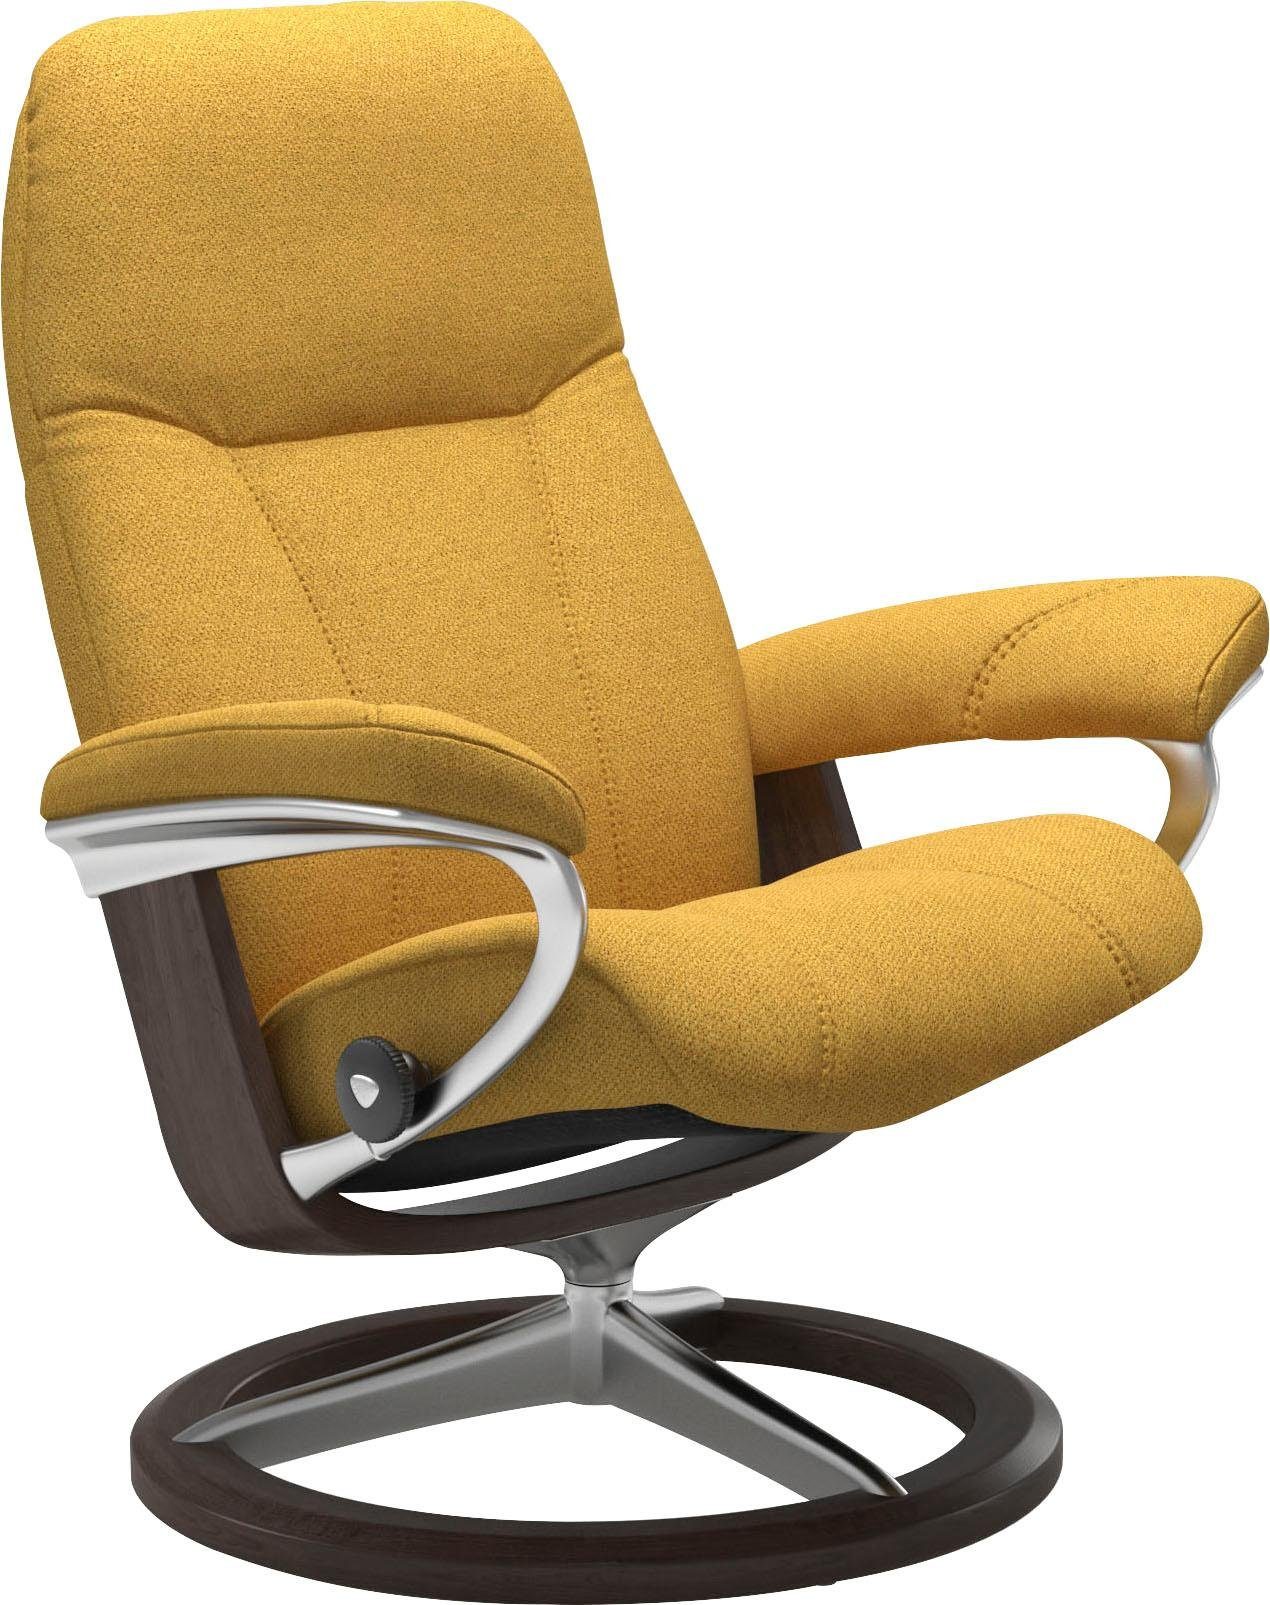 Signature Consul, Stressless® Base, Relaxsessel Wenge mit Gestell S, Größe